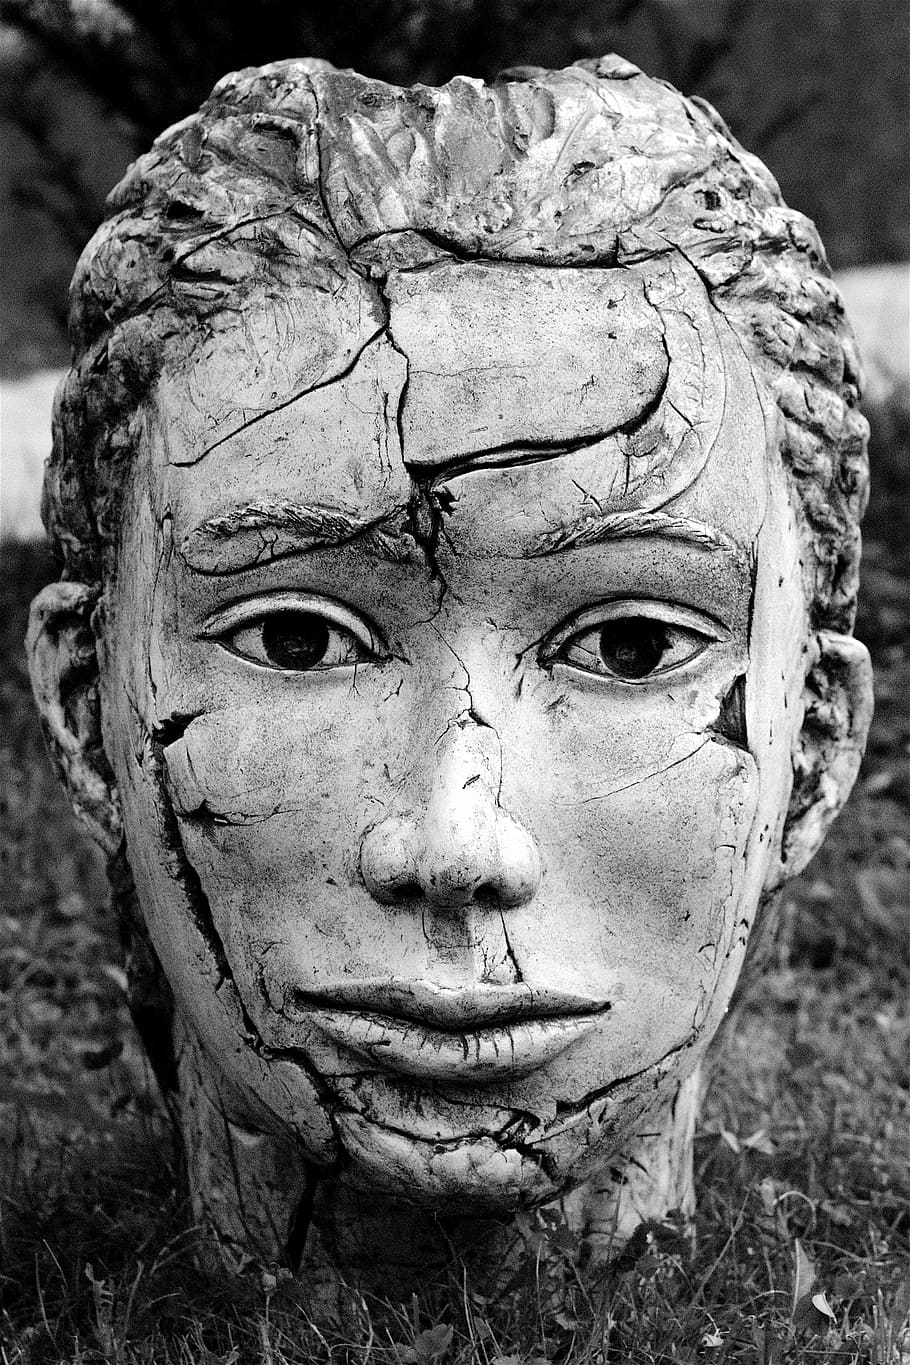 grayscale photography of cracked head bust on ground, mouth, eyes